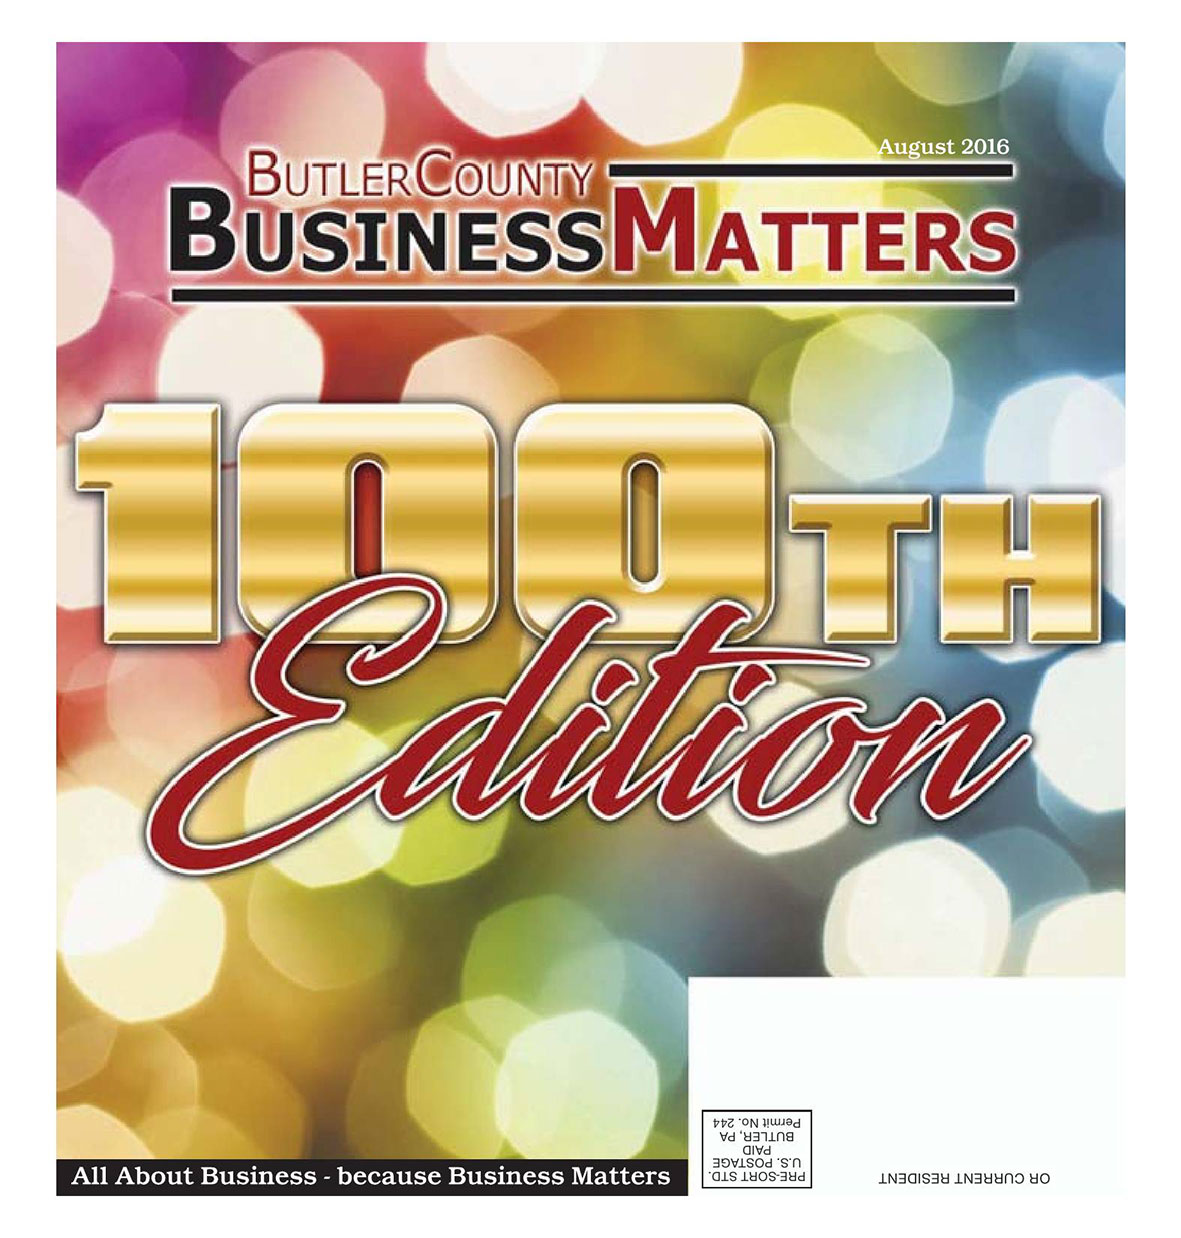 August 2016 - 100th Edition